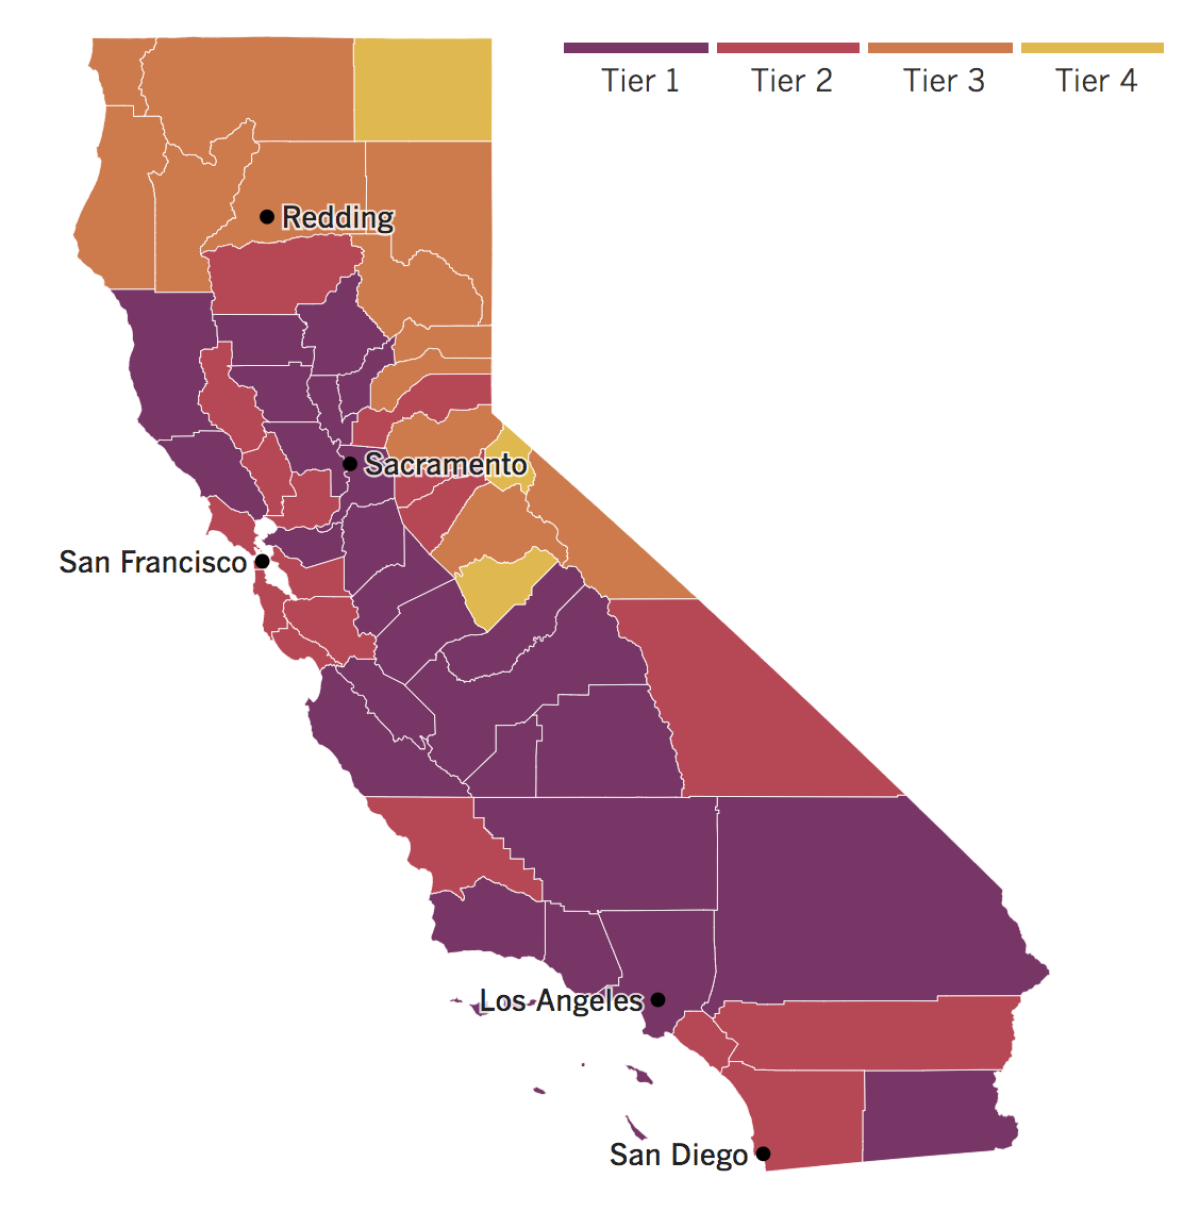 A map of California showing the tiers to which counties have been assigned based on local levels of coronavirus risk.